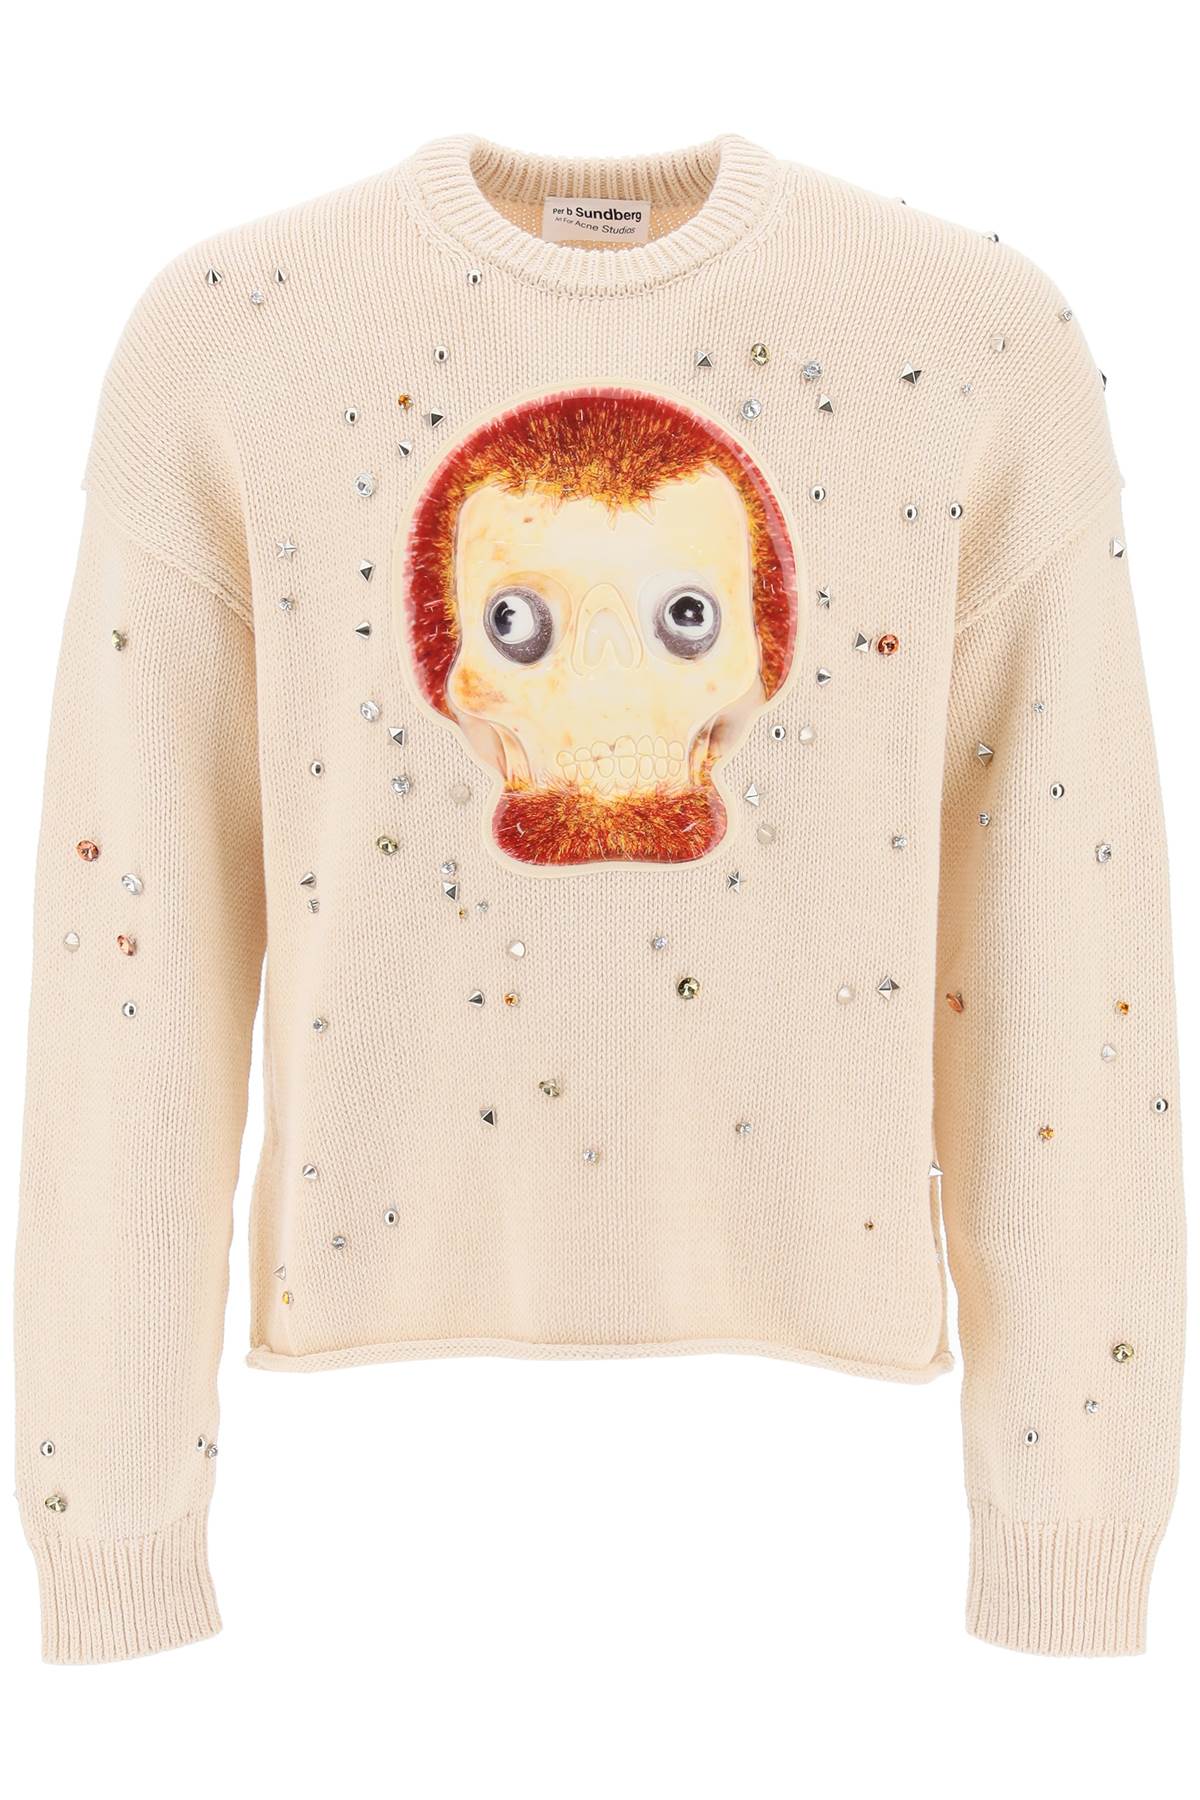 ACNE STUDIOS Men's Studded Pullover with Animation for SS24